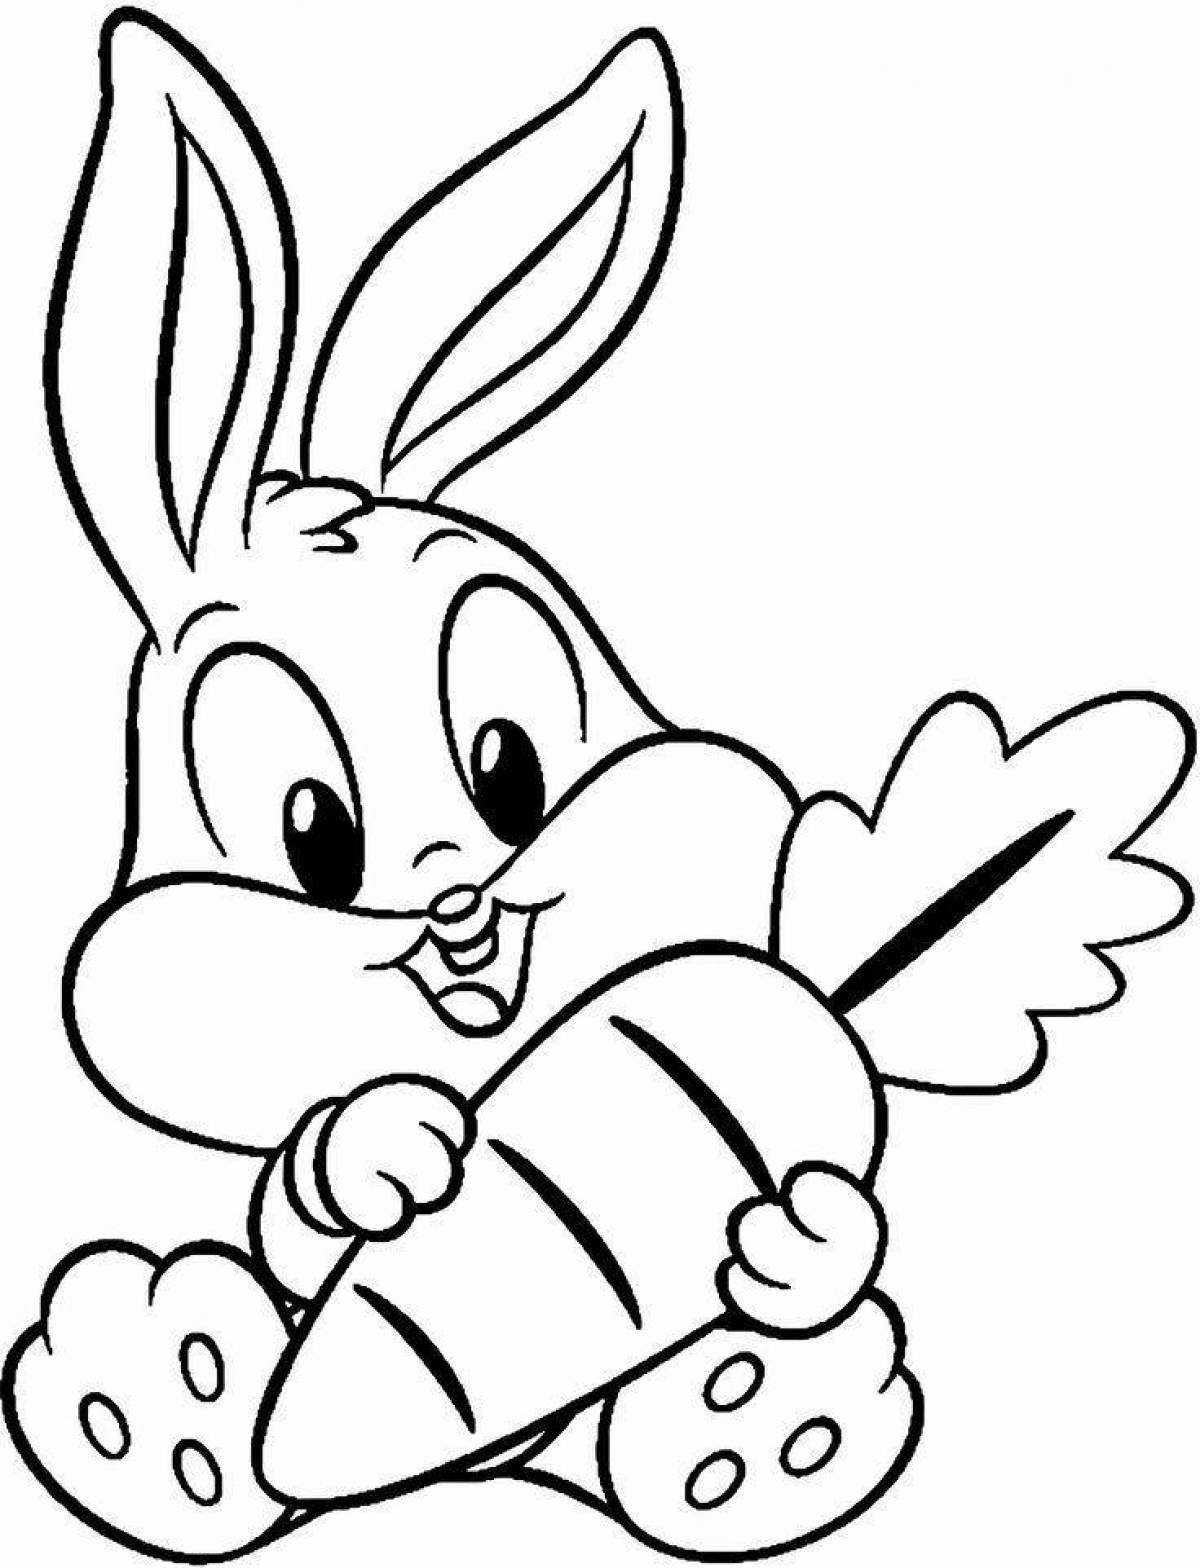 Amazing bunny coloring book for kids